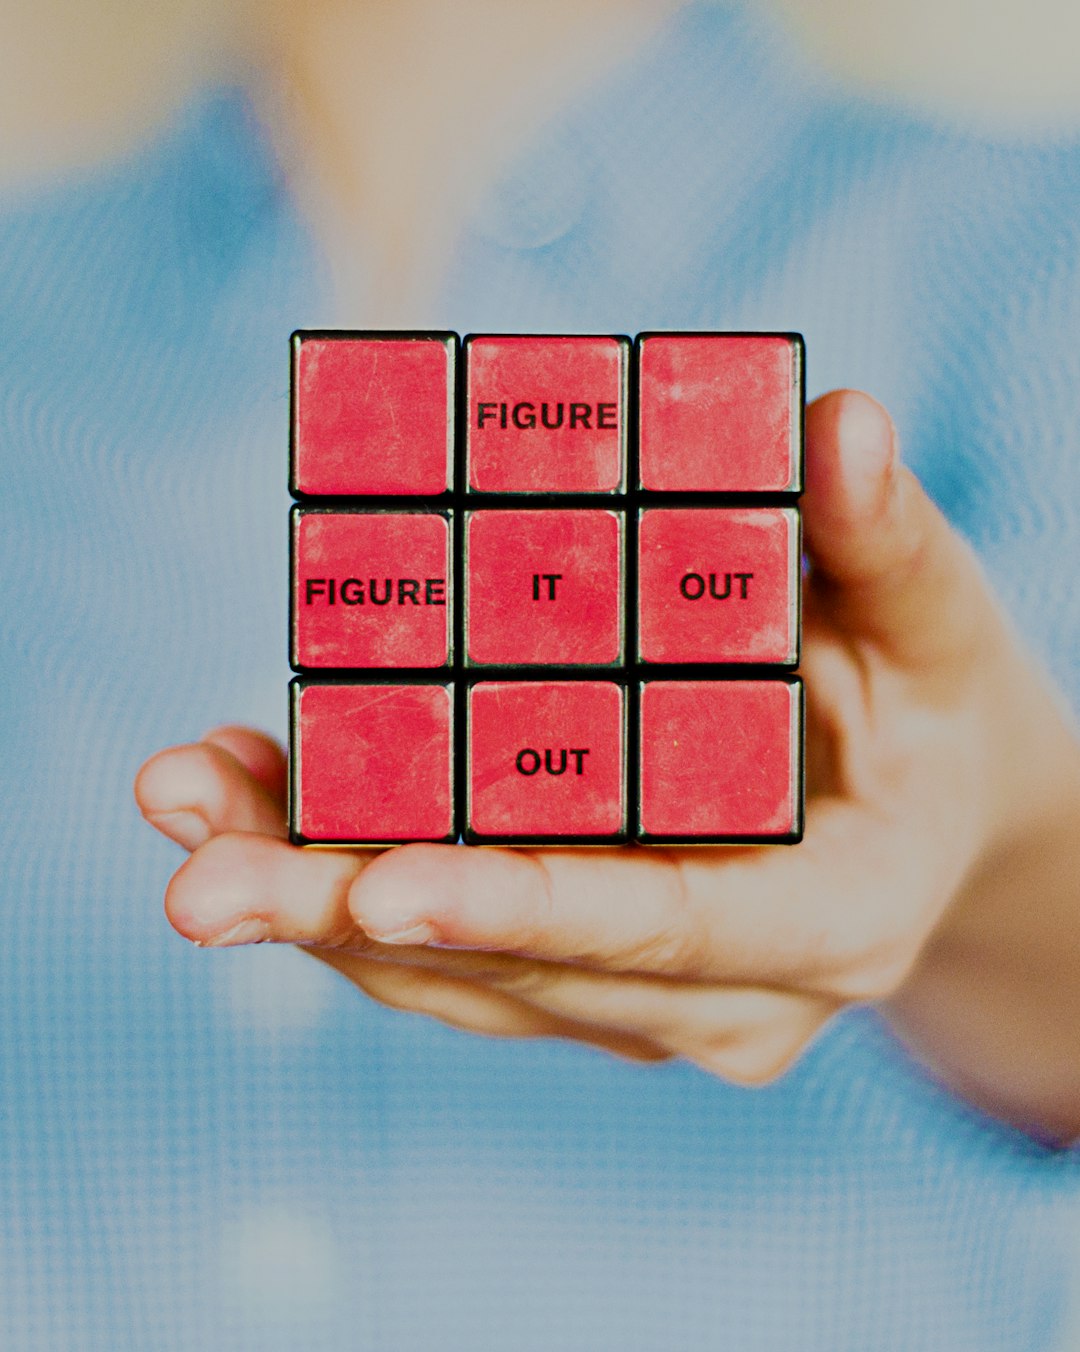 Person holding a solved rubik's cube with the words "figure it out".